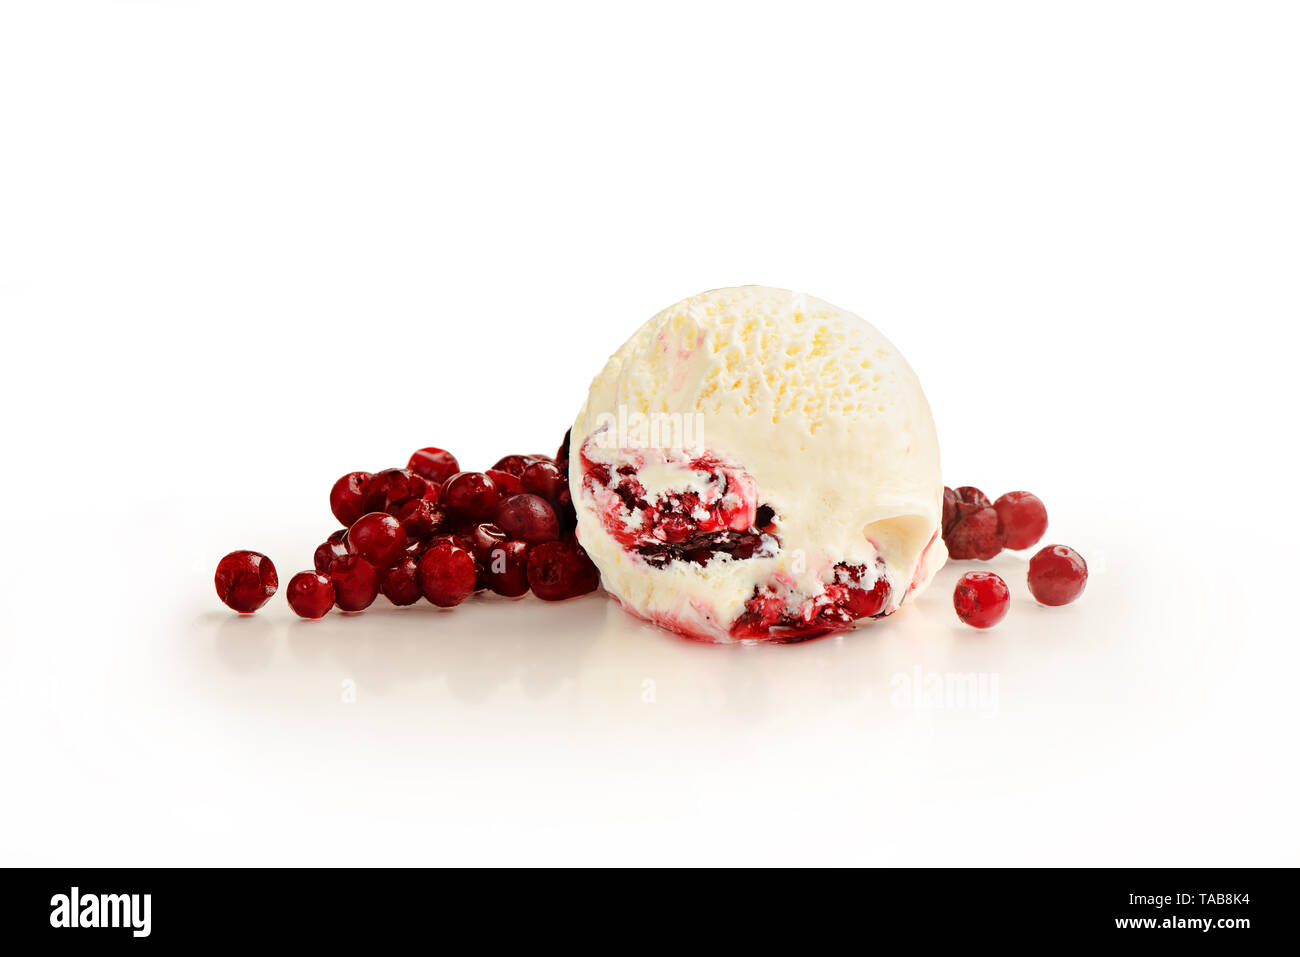 Ice cream ball, cranberry flavor with ingredients, isolated on a white background. Stock Photo